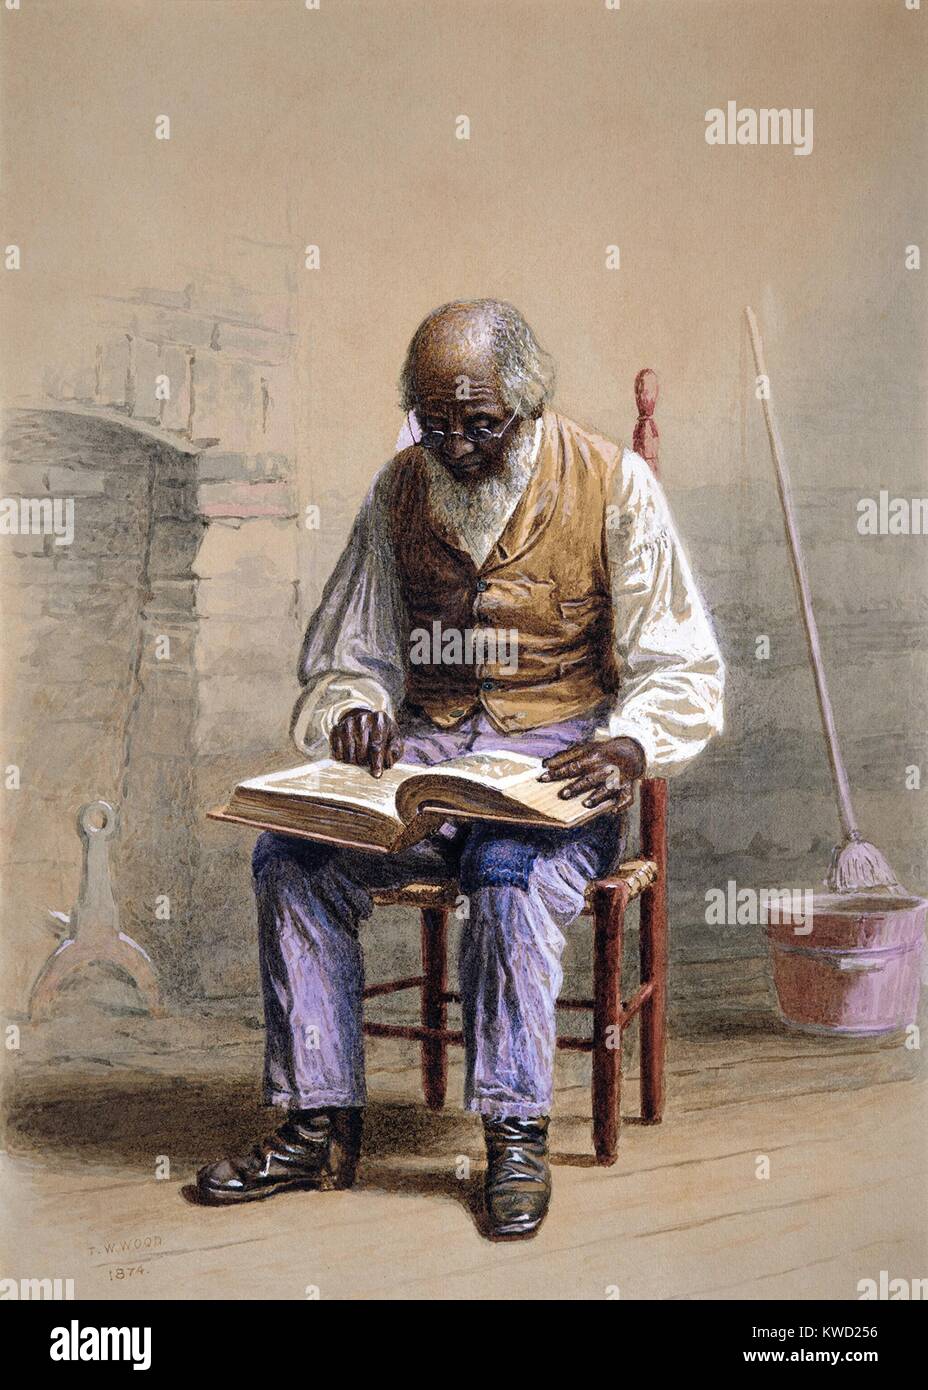 READING THE SCRIPTURES, by Thomas Waterman Wood, 1874, American watercolor painting. The artist grew up in rural Vermont, specialized in depicting African Americans. This painting shows a previously enslaved elderly man reading a Bible. It presents an hopeful theme, of education and religious piety made possible by emancipation  (BSLOC 2017 20 150) Stock Photo